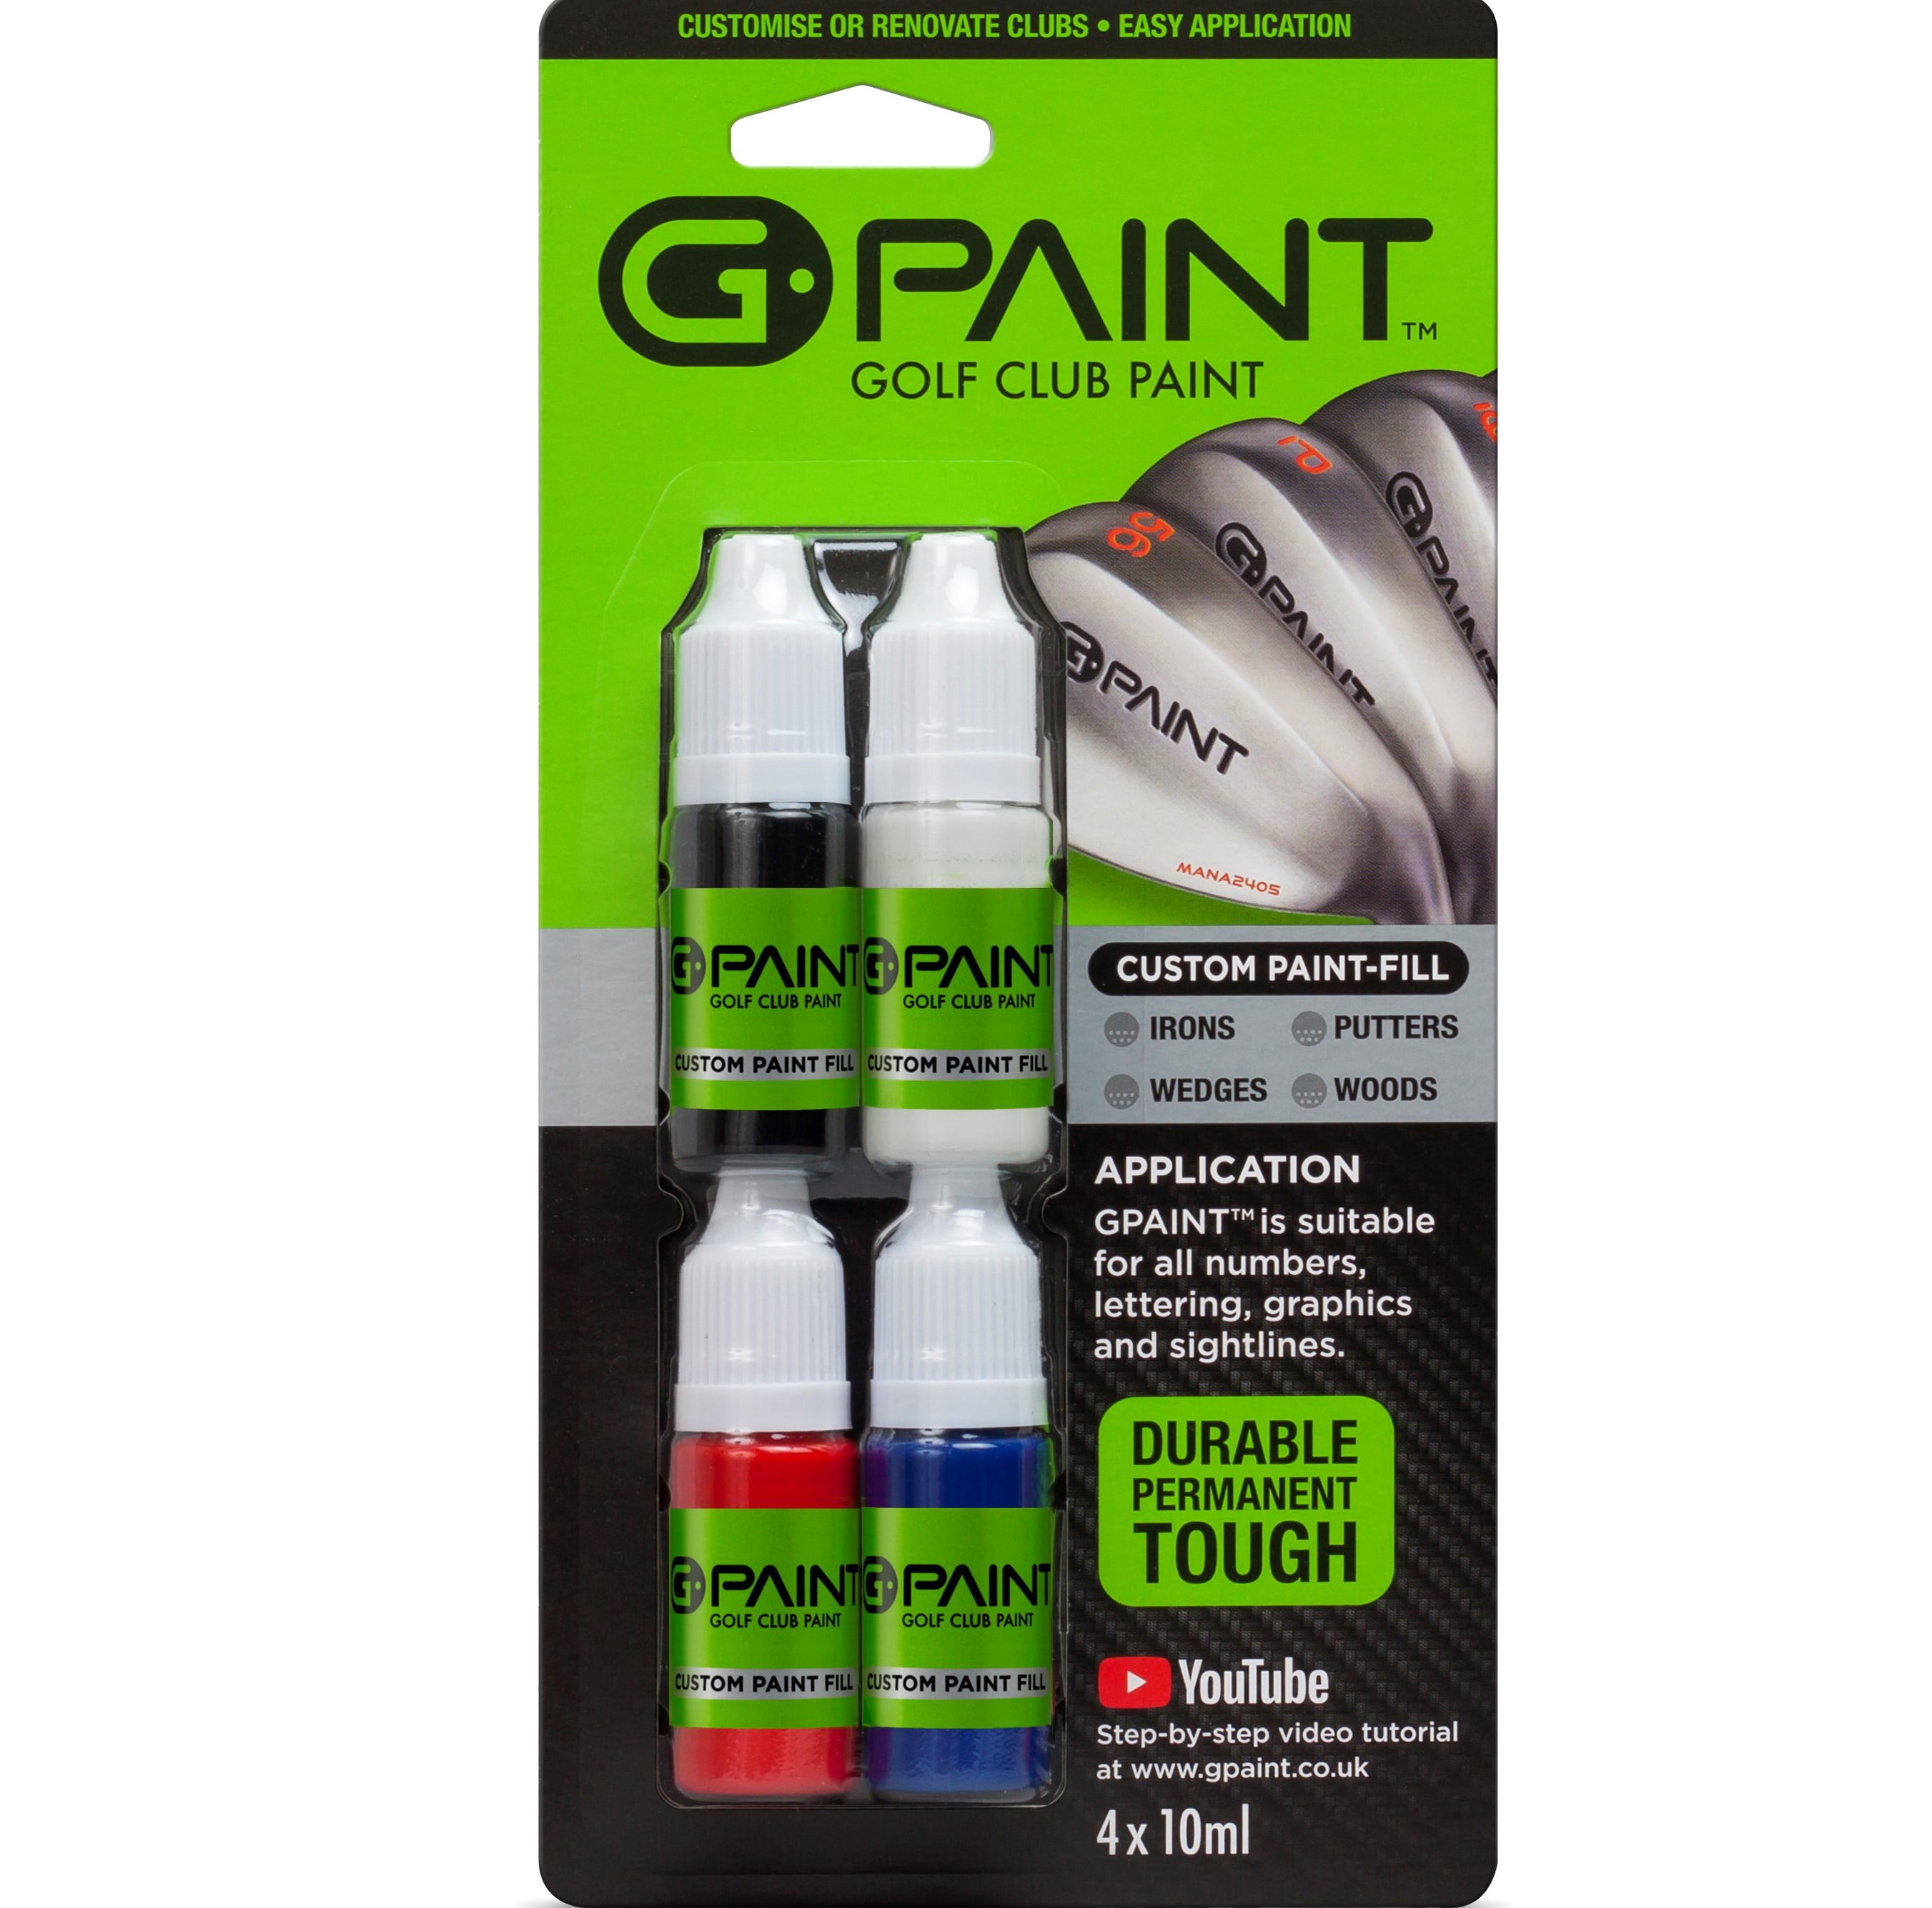 G-Paint Golf Club Paint - Touch Up, Fill In, Customize or Renovate Your  Clubs - 4 Pack of 10ml Bottles. Black, White, Red & Blue 